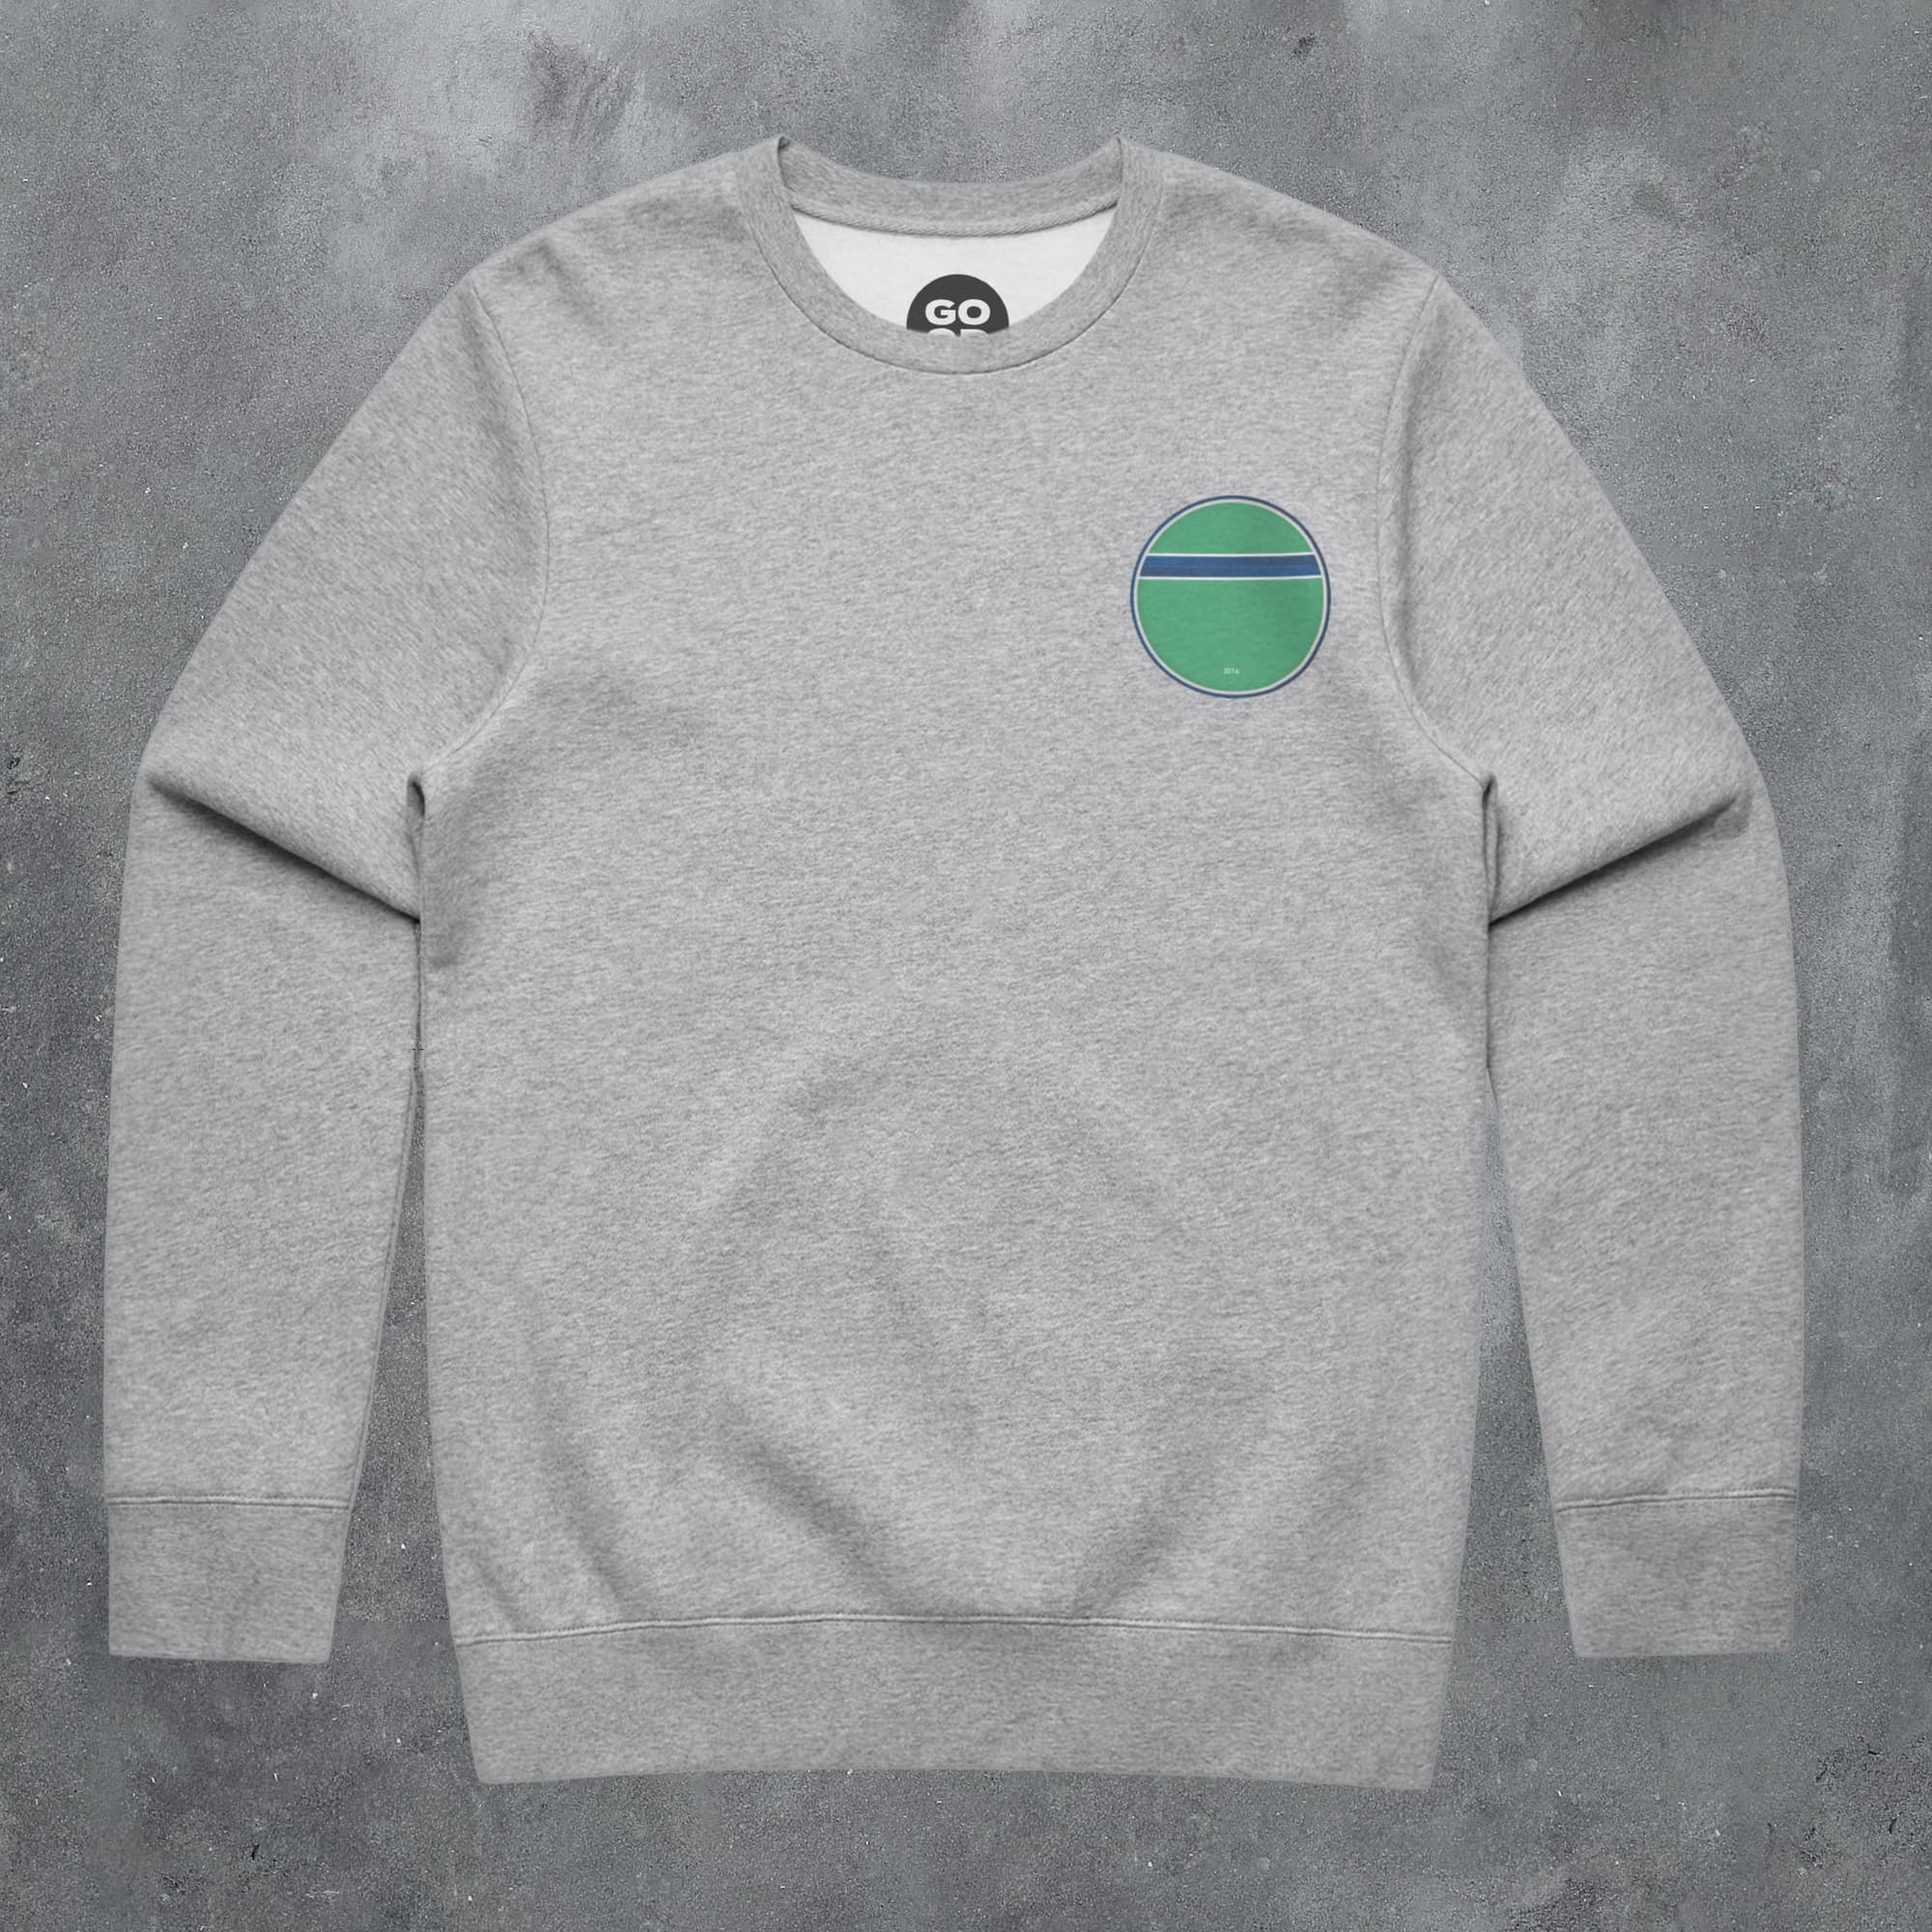 a grey sweatshirt with a green circle on the chest